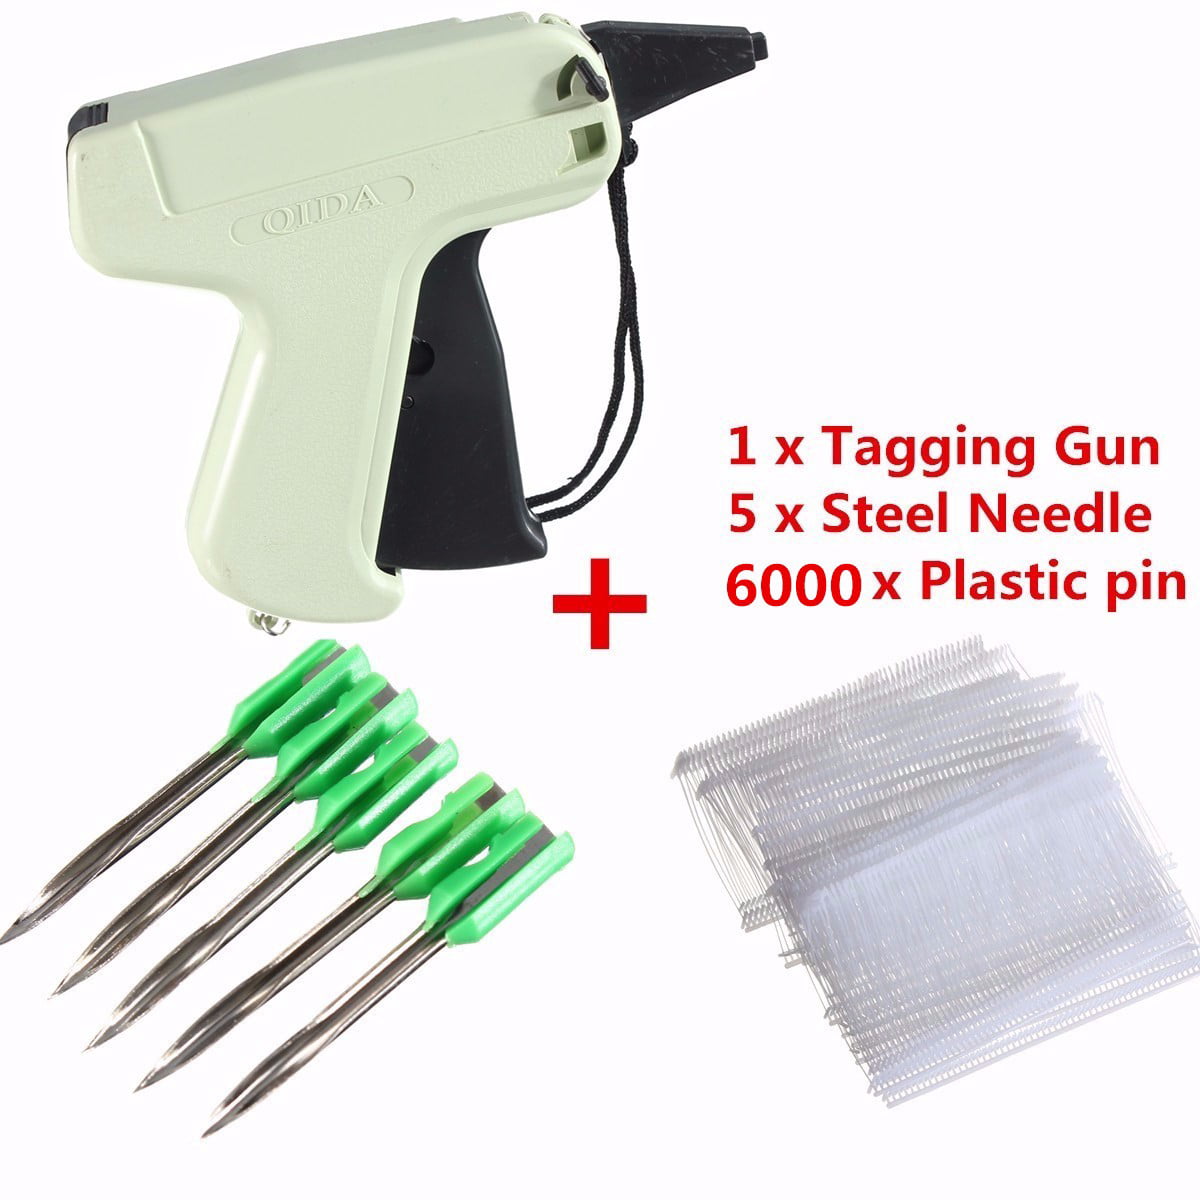 5Pcs Standard Price Tag Gun Needles For Any Standard Label Price Tag AttacFBDU 